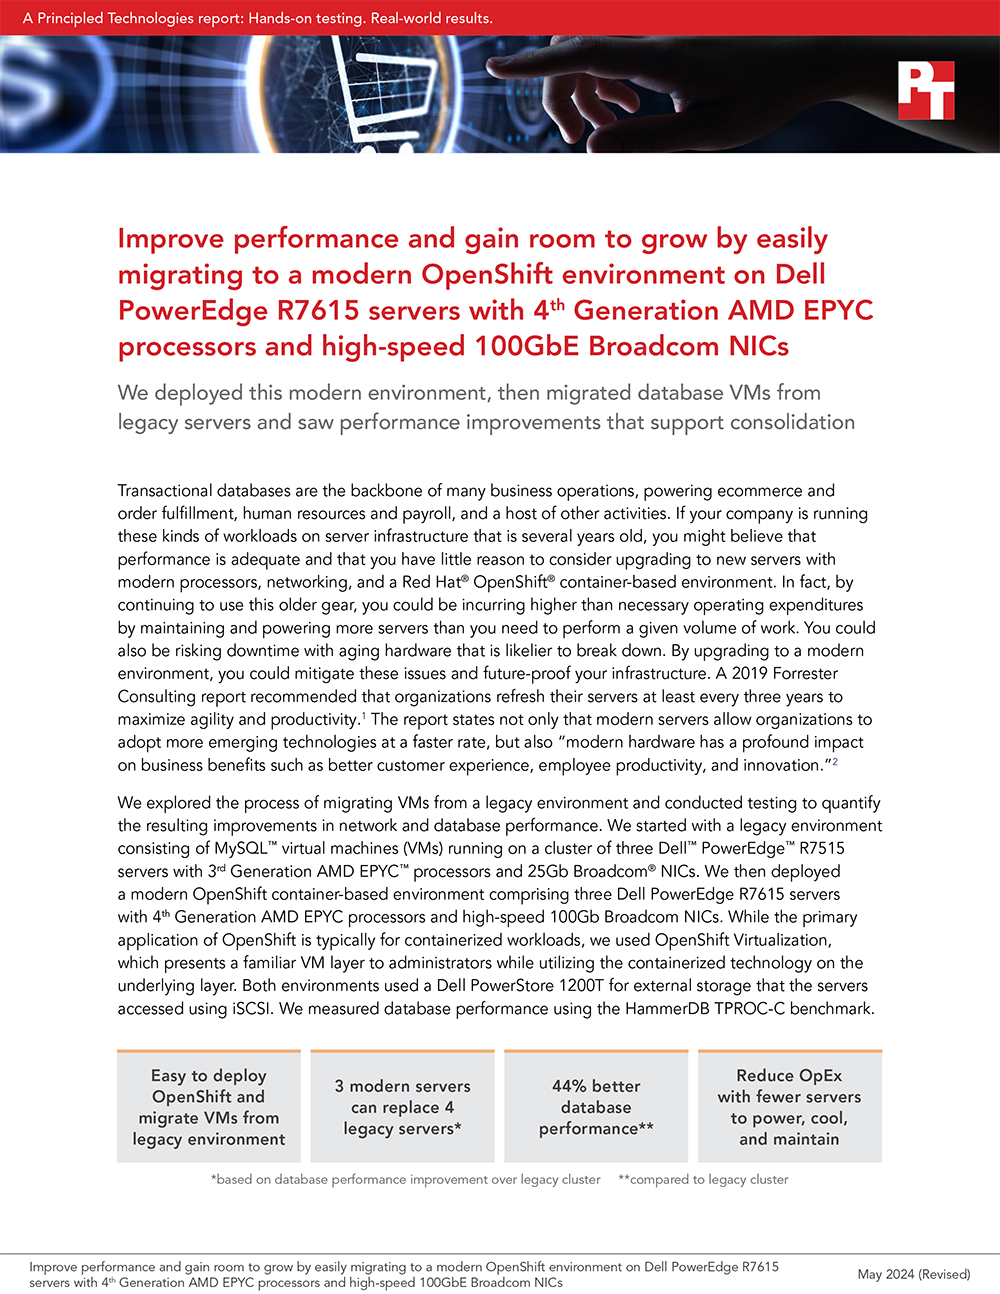 Principled Technologies publishes New Study on Upgrading to Dell PowerEdge R7615 Servers with 4th Gen AMD EPYC Processors and 100GbE Broadcom NICs